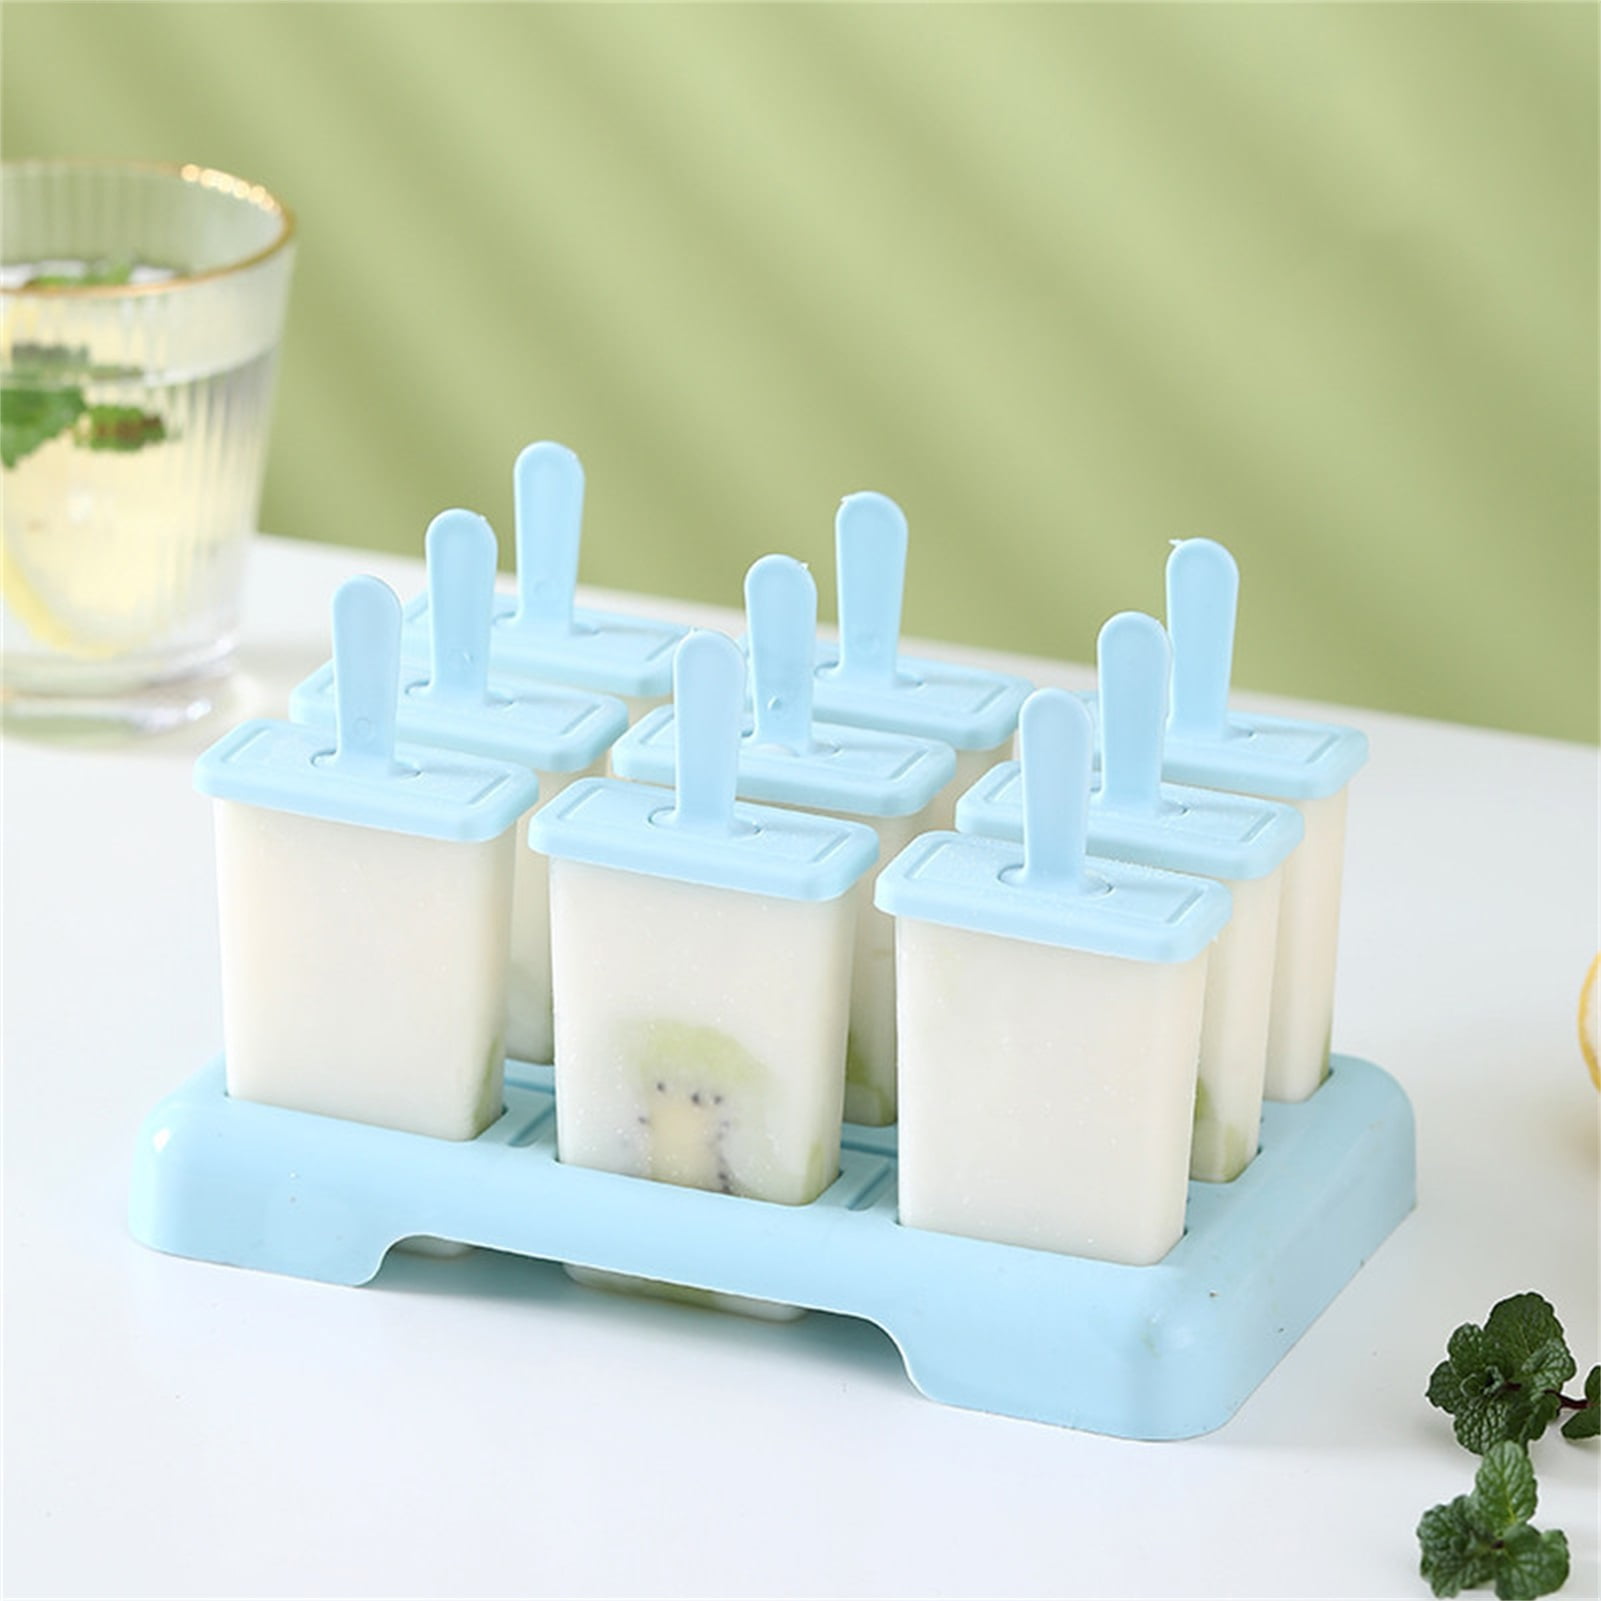 Leaqu Popsicle Molds 90 Pieces Silicone Ice Pop Molds BPA Free Popsicle Mold Reusable Easy Release Ice Pop Maker Ice Cream Mold Food Grade Non-Stick